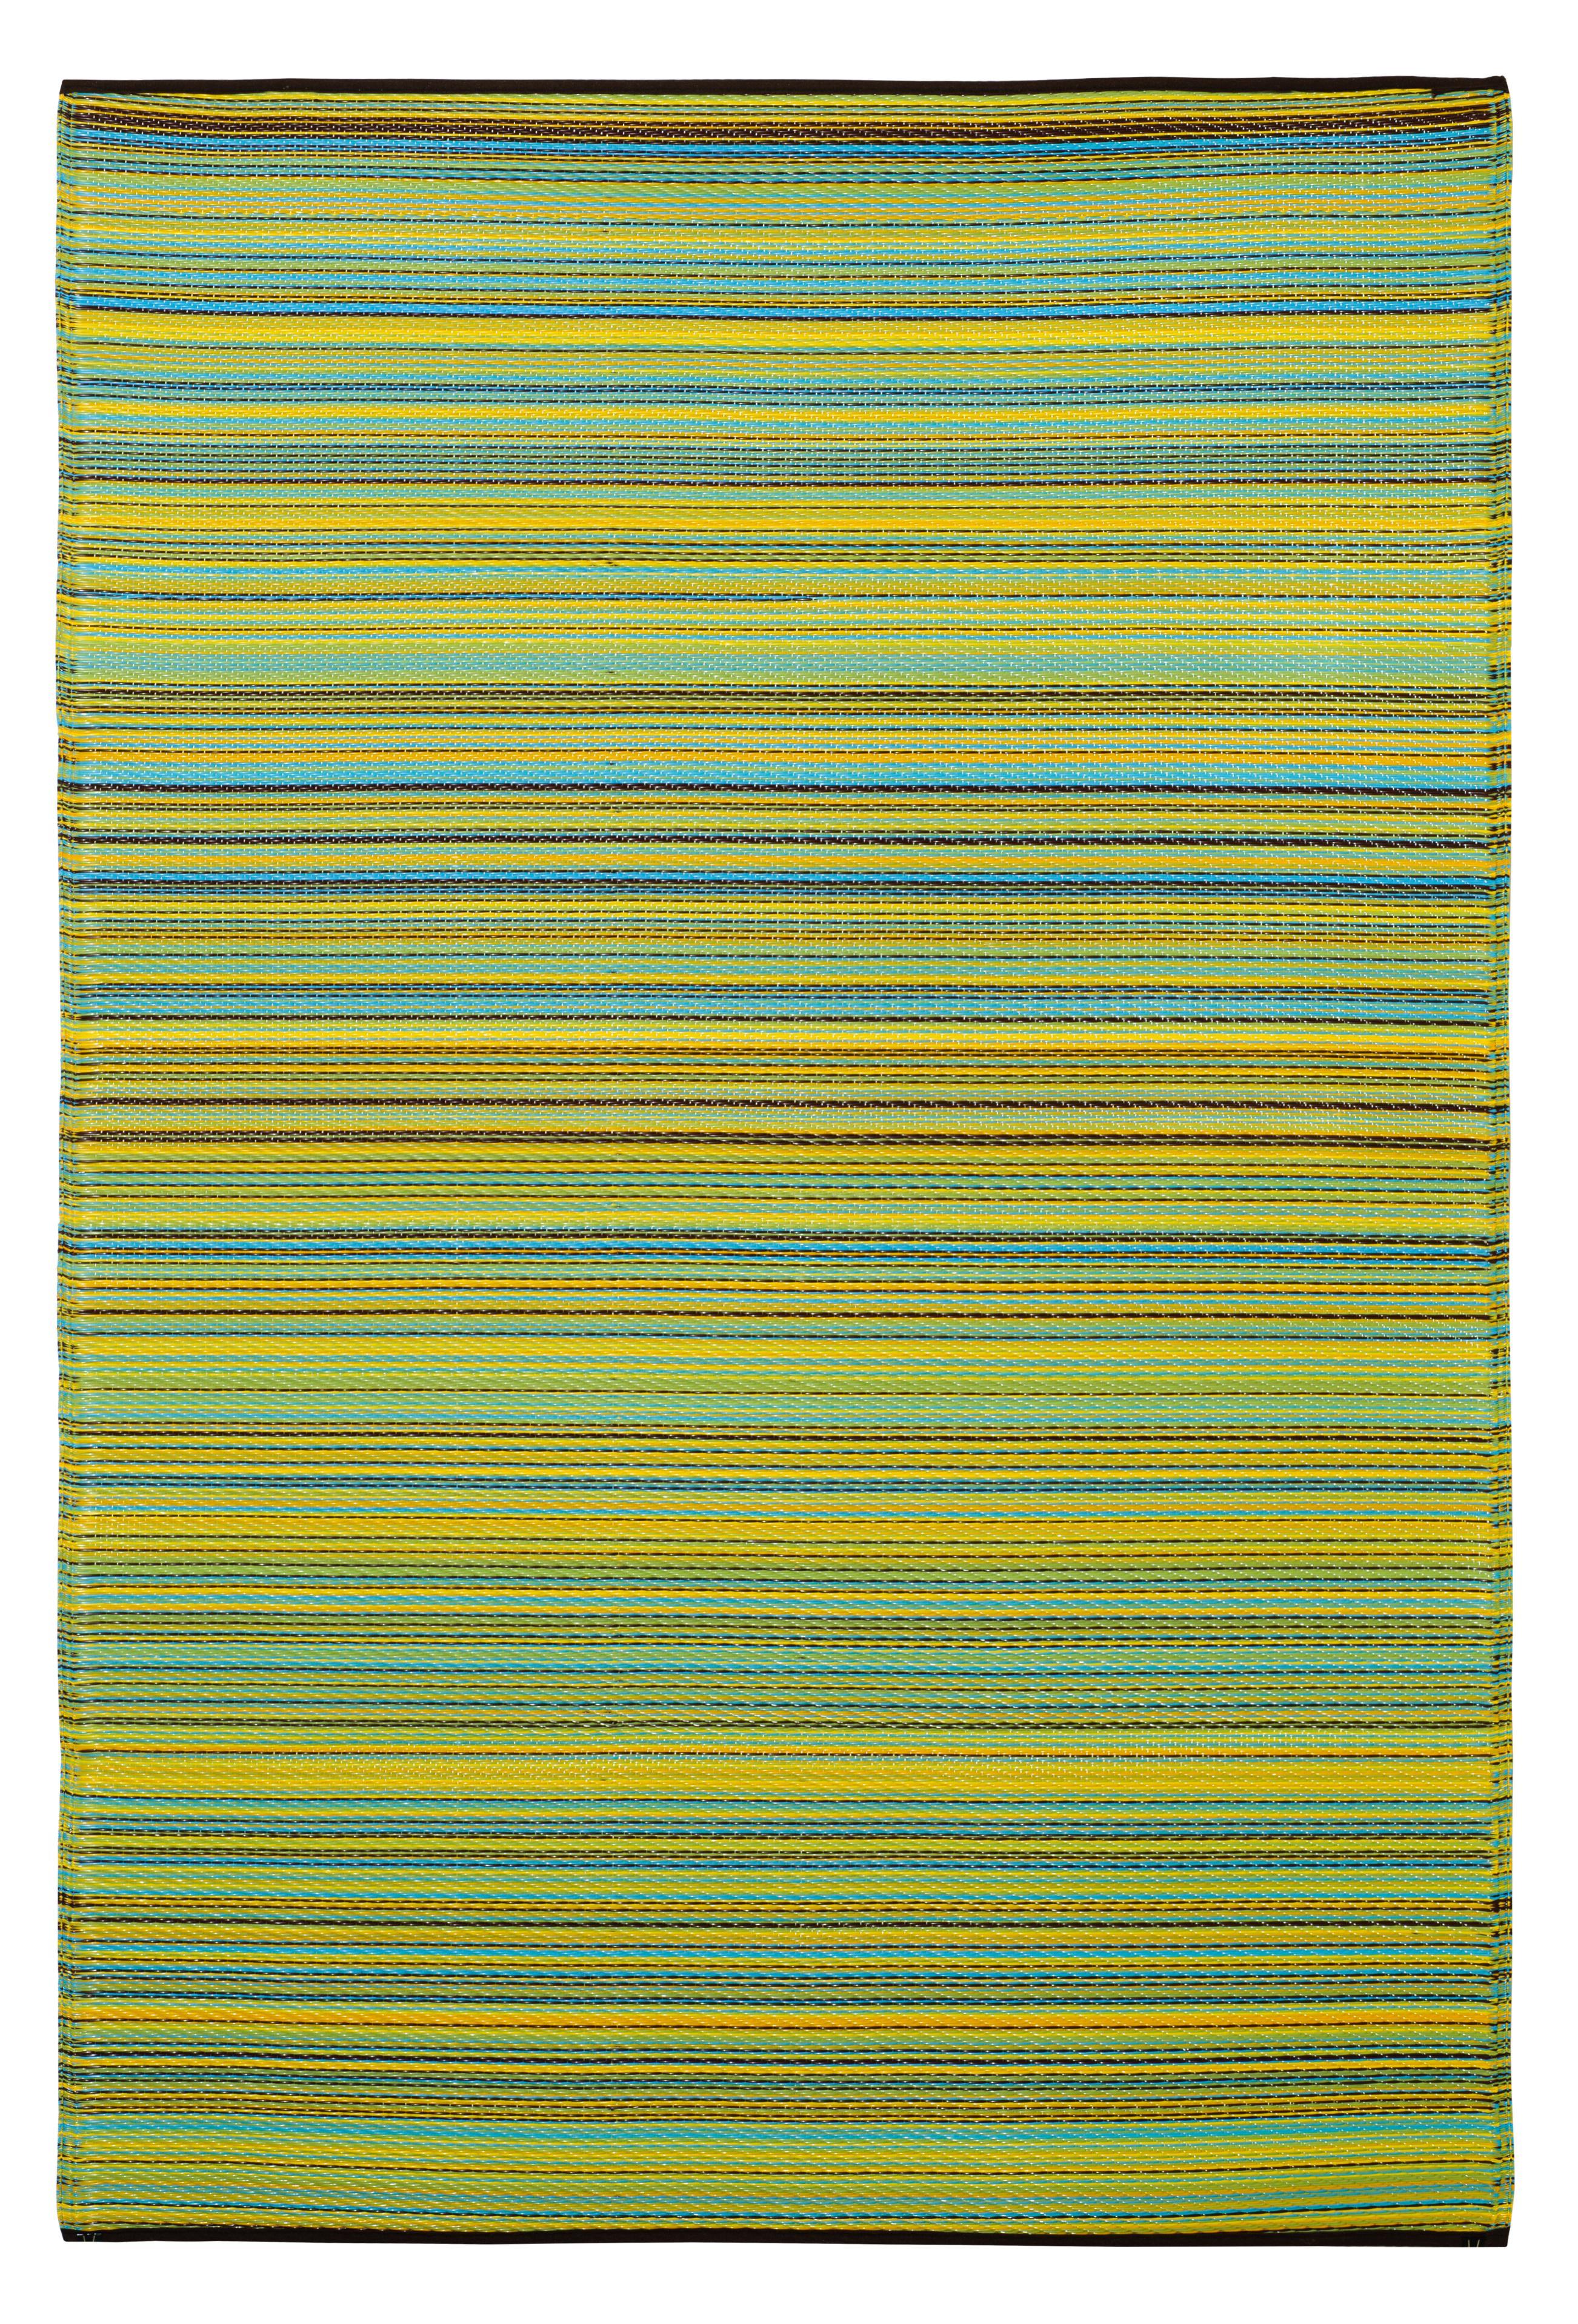 180x270 cm Cancun Lemon and Apple Green Recycled Plastic Outdoor Rug